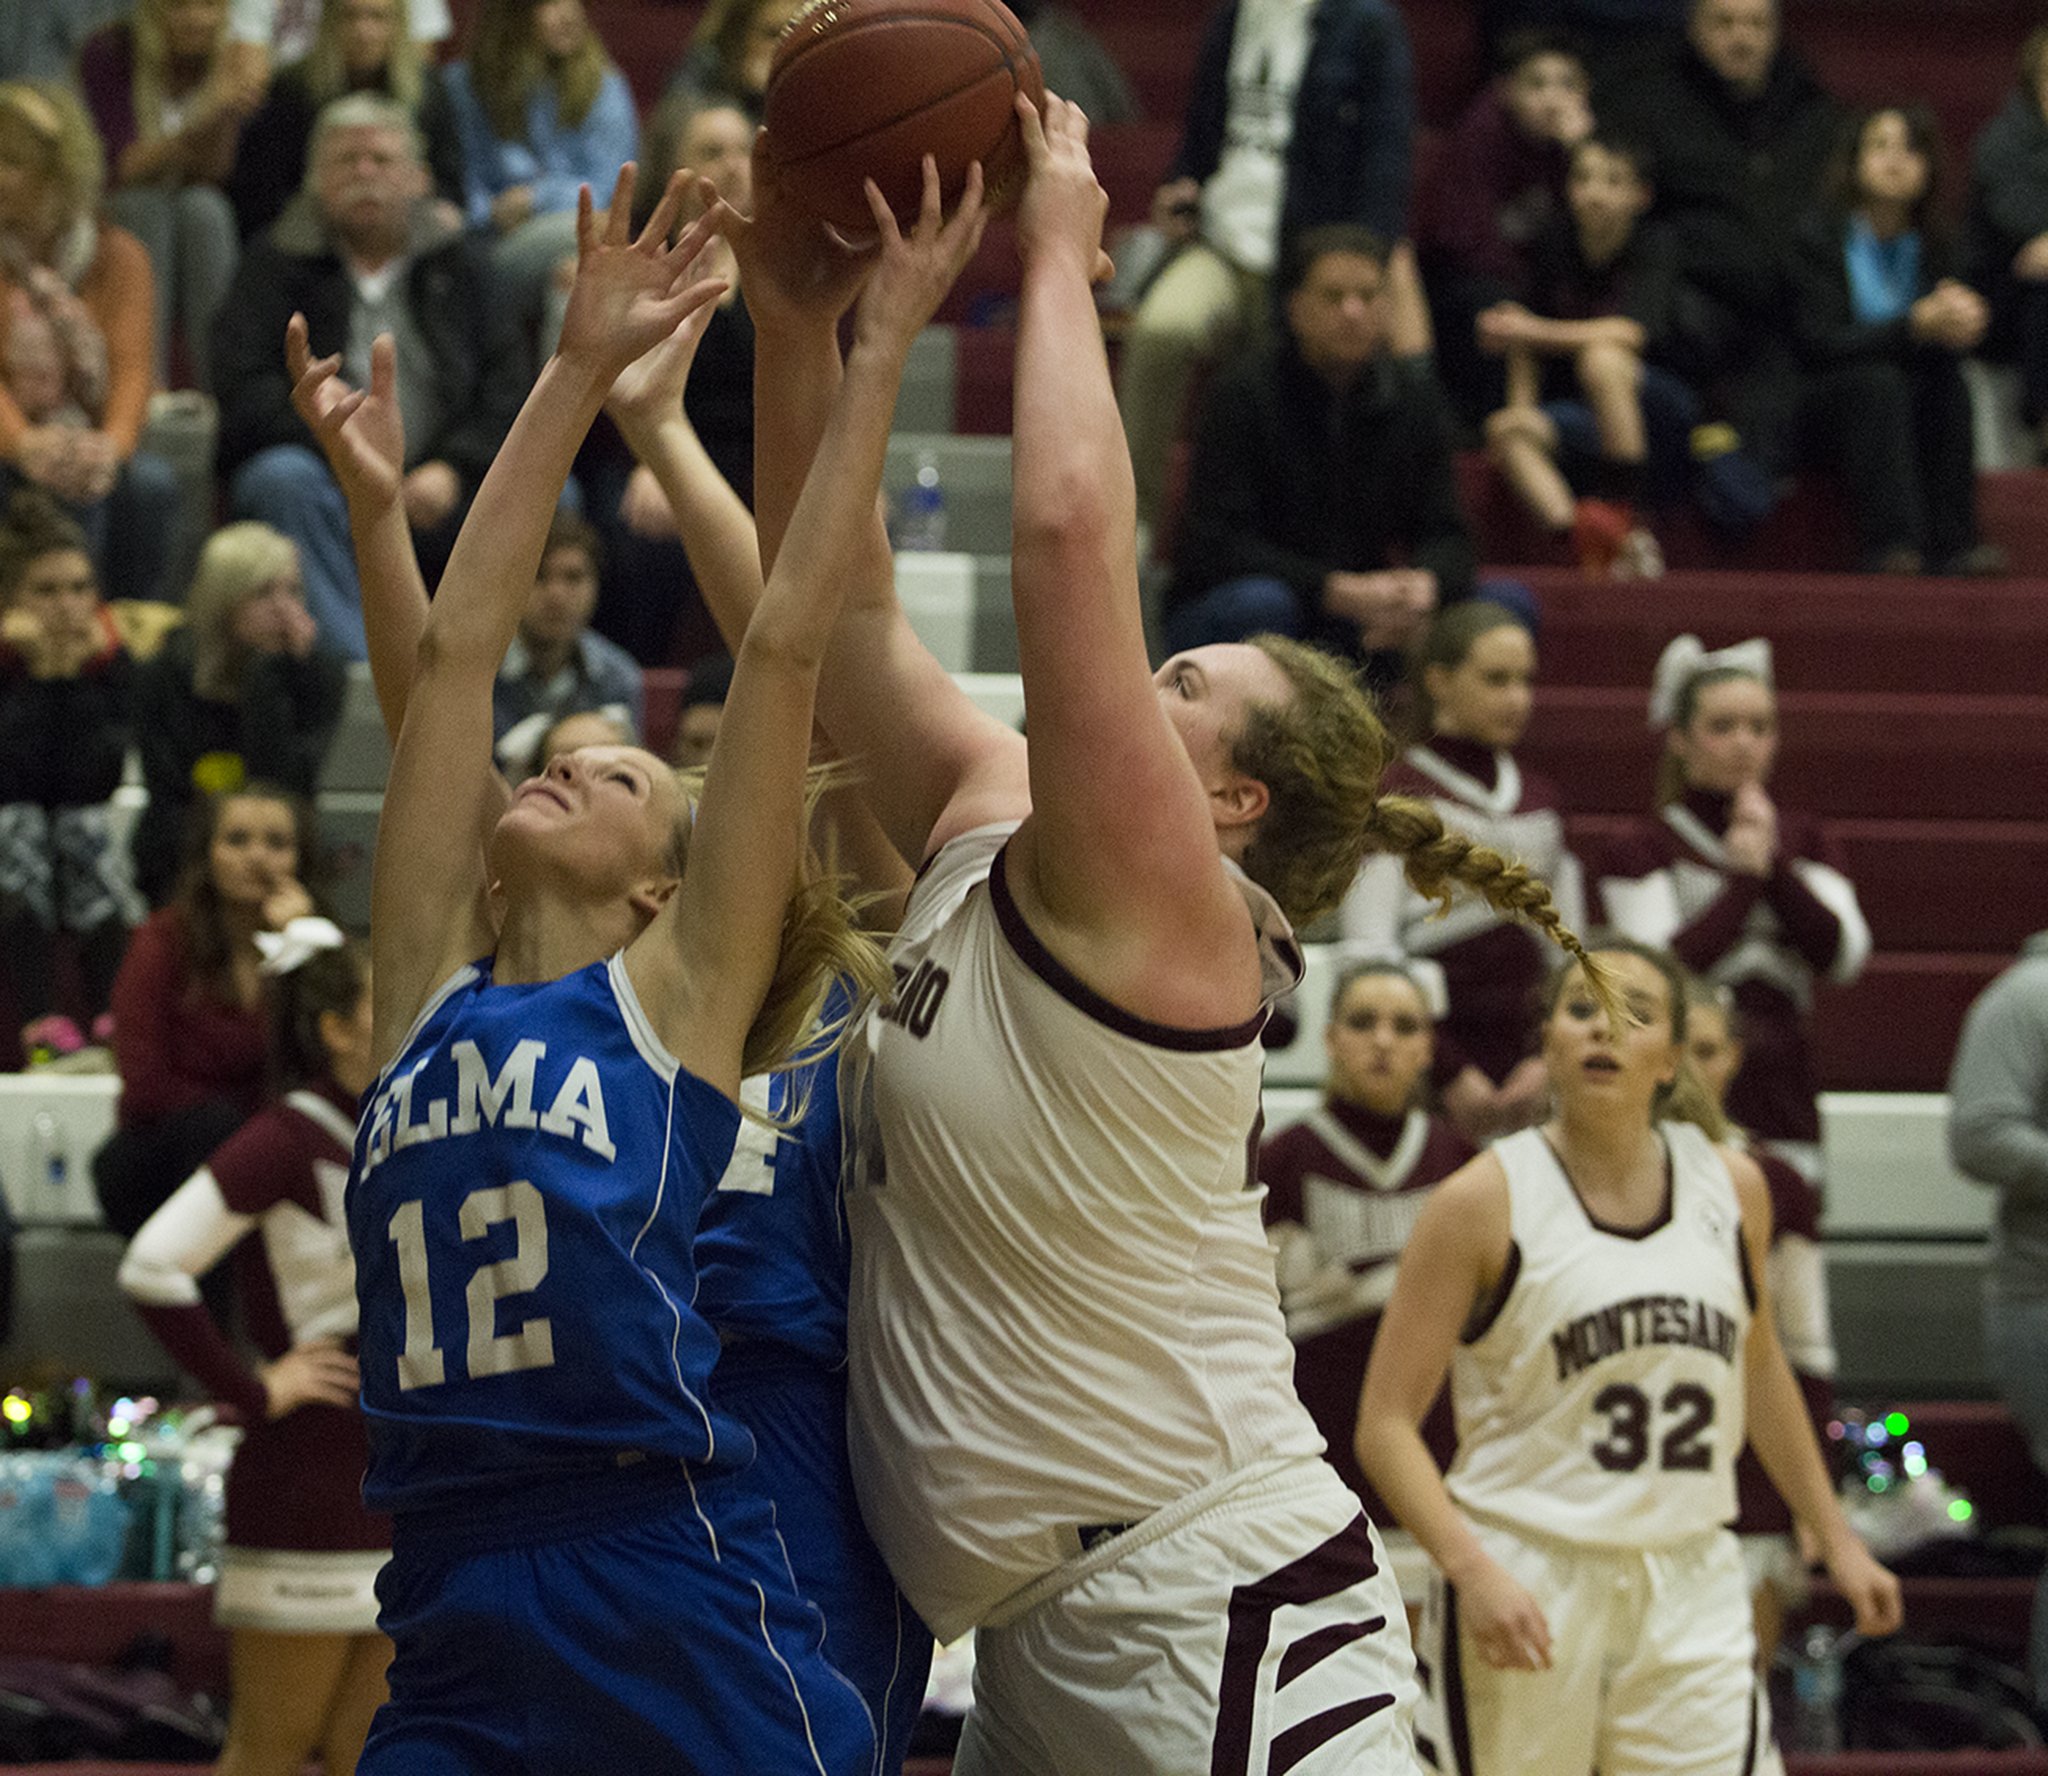 (Justin Damasiewicz | GH Newspaper Group) Elma’s Brooke Sutherby and Montesano’s Jordan Spradlin battle for a rebound during an Evergreen 1A League game at Bo Griffith Gym on Thursday.